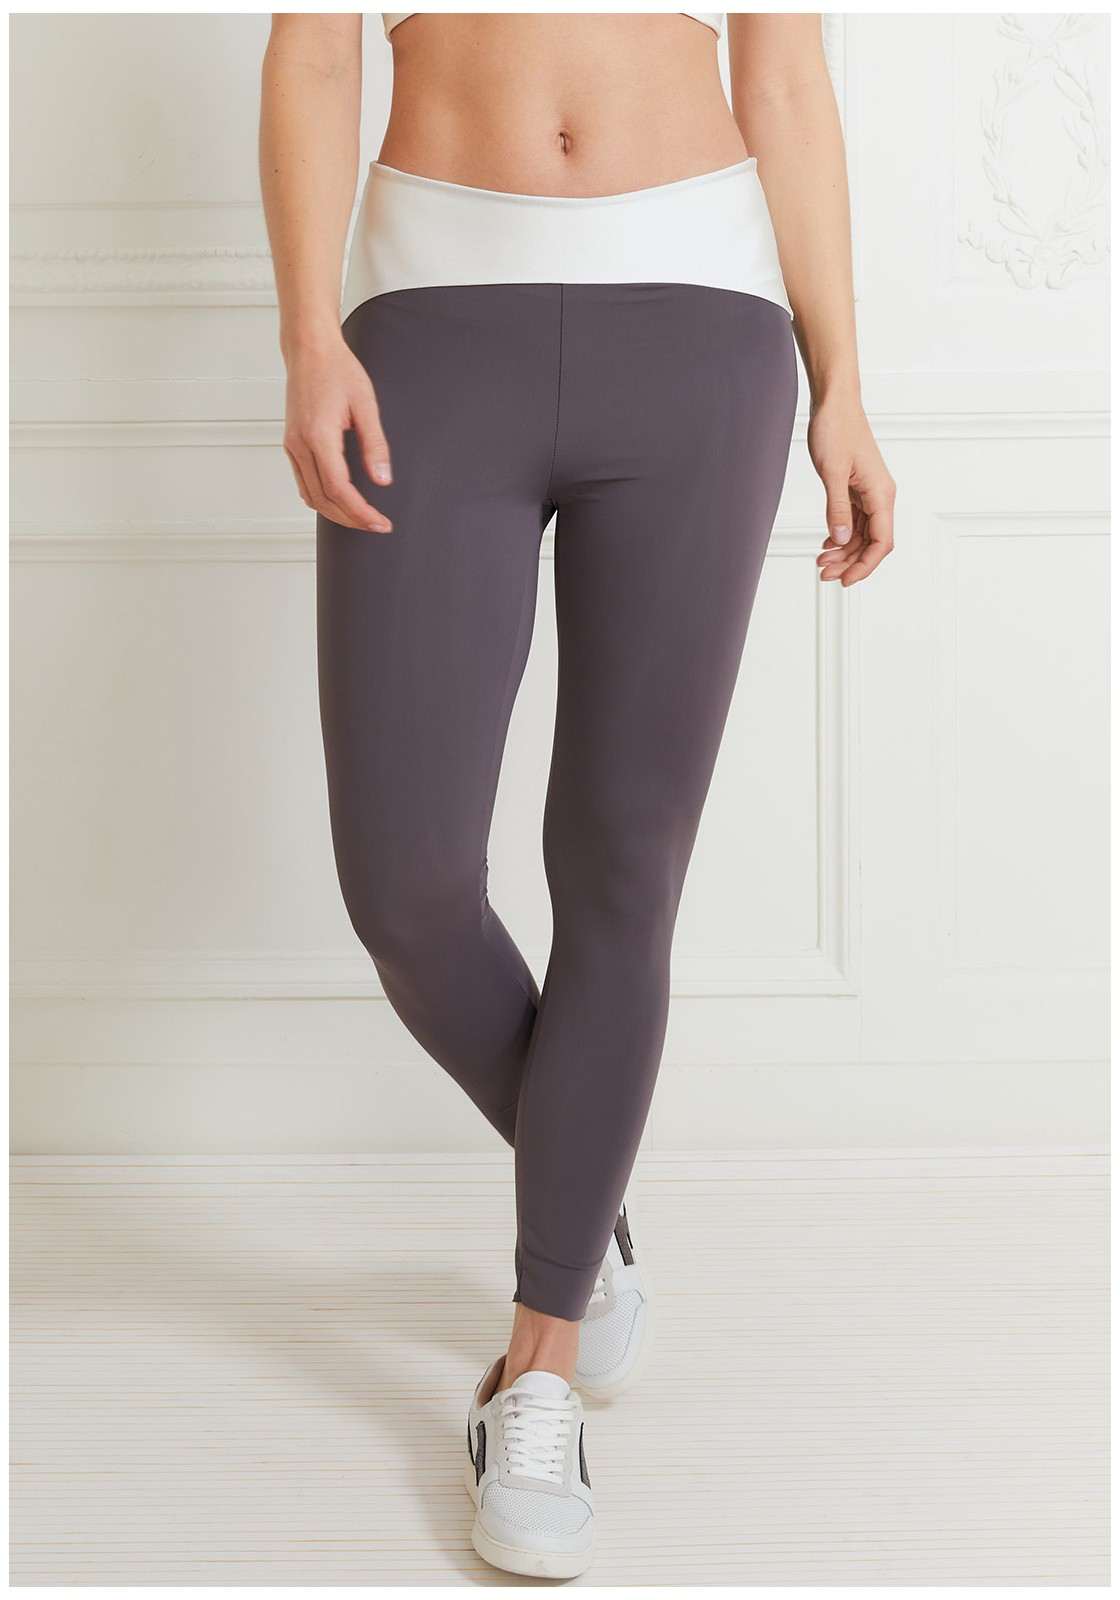 Eco-responsible sports leggings taupe and glittery white Waist XS Colour  Taupe/Glittery white Waist XS Colour Taupe/Glittery white